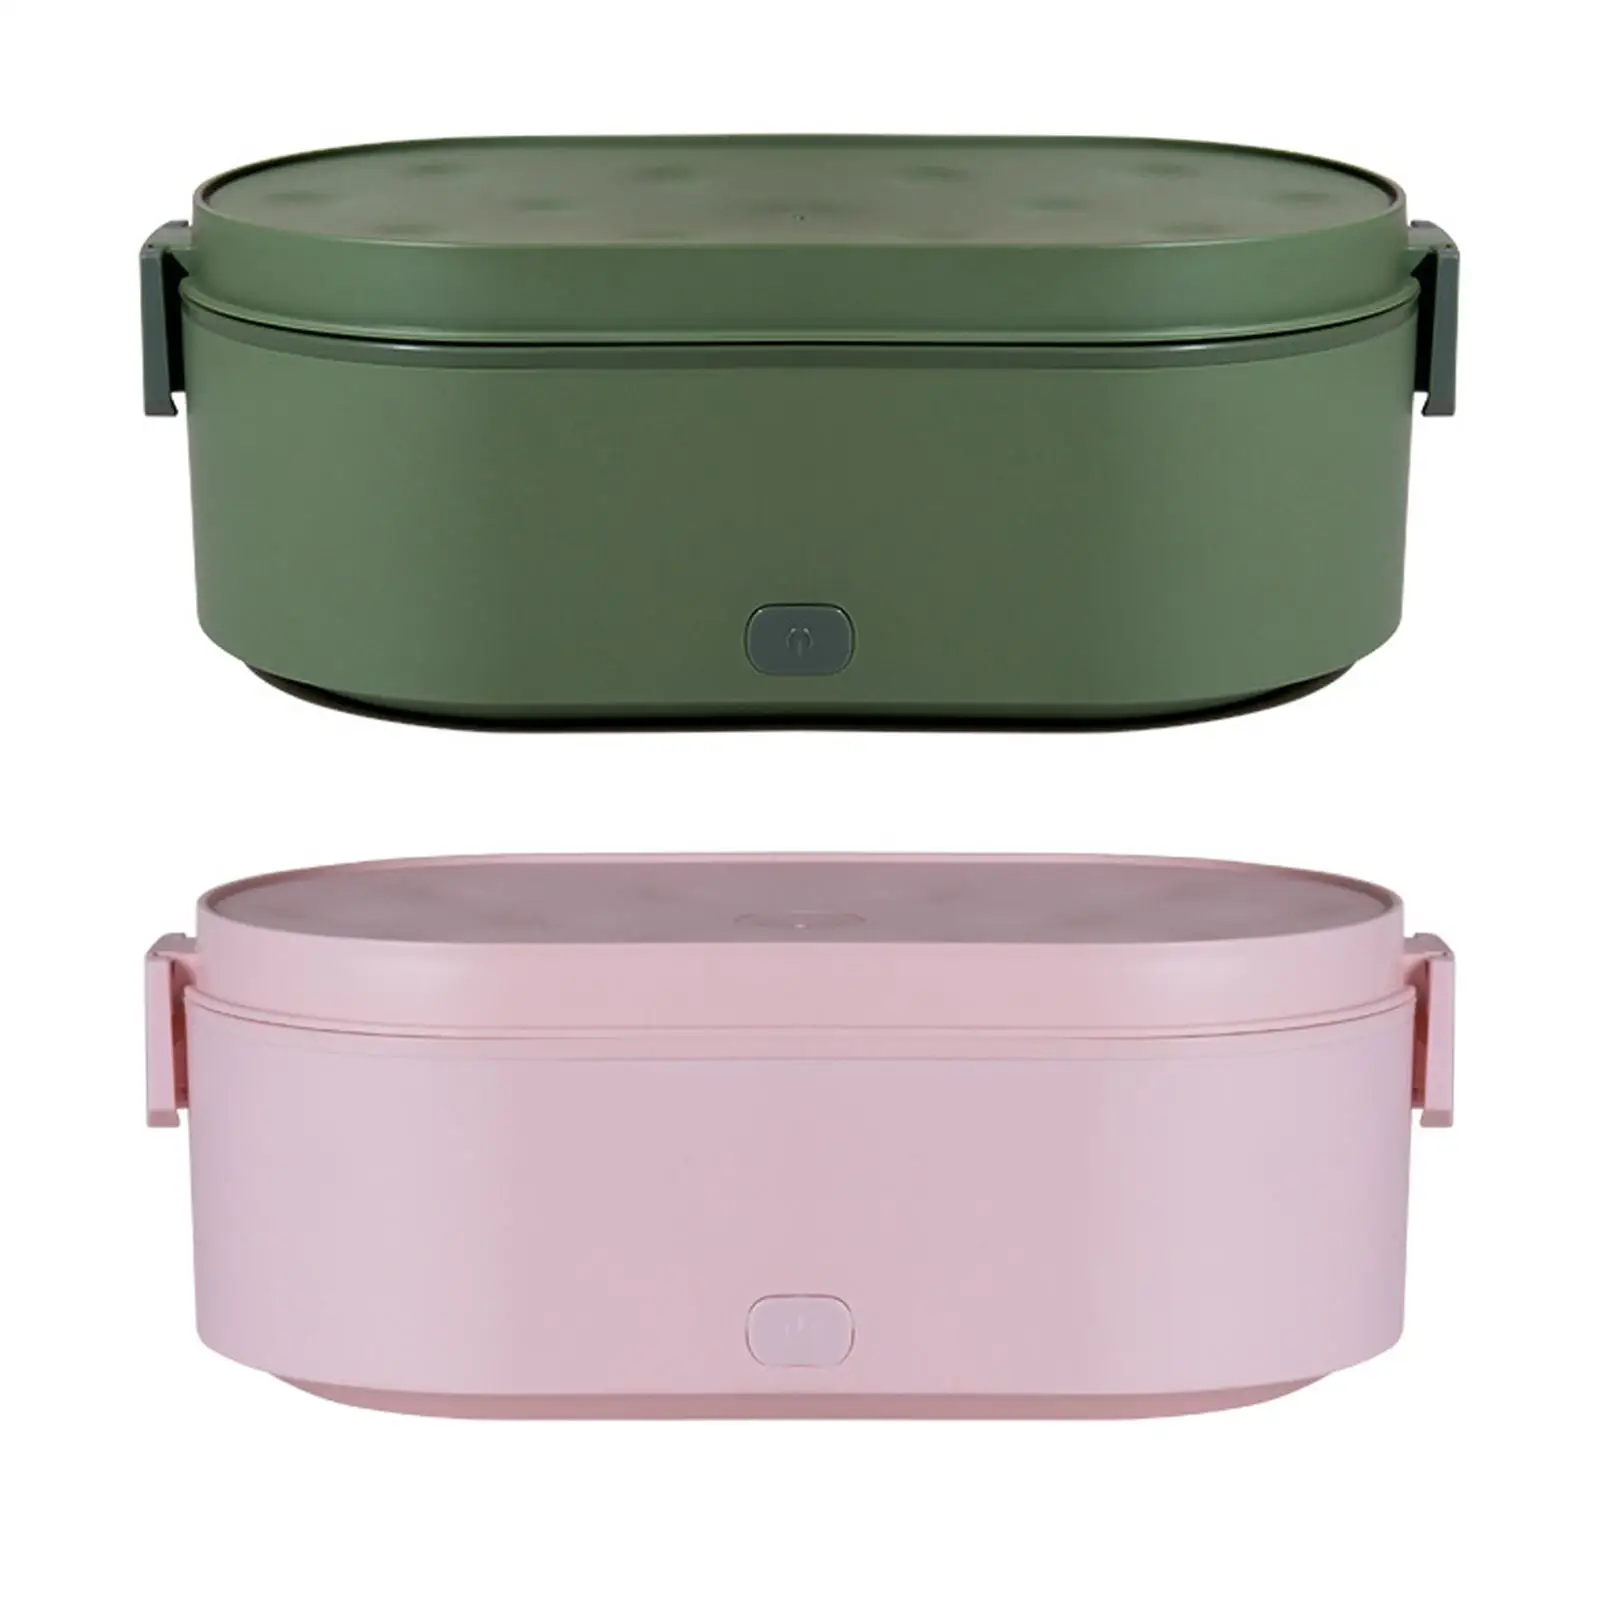 USB Heating Food Warmer Multifunction Removable Portable Lunch Box Electric Heated Lunch Boxes for Office Truck Picnic Car